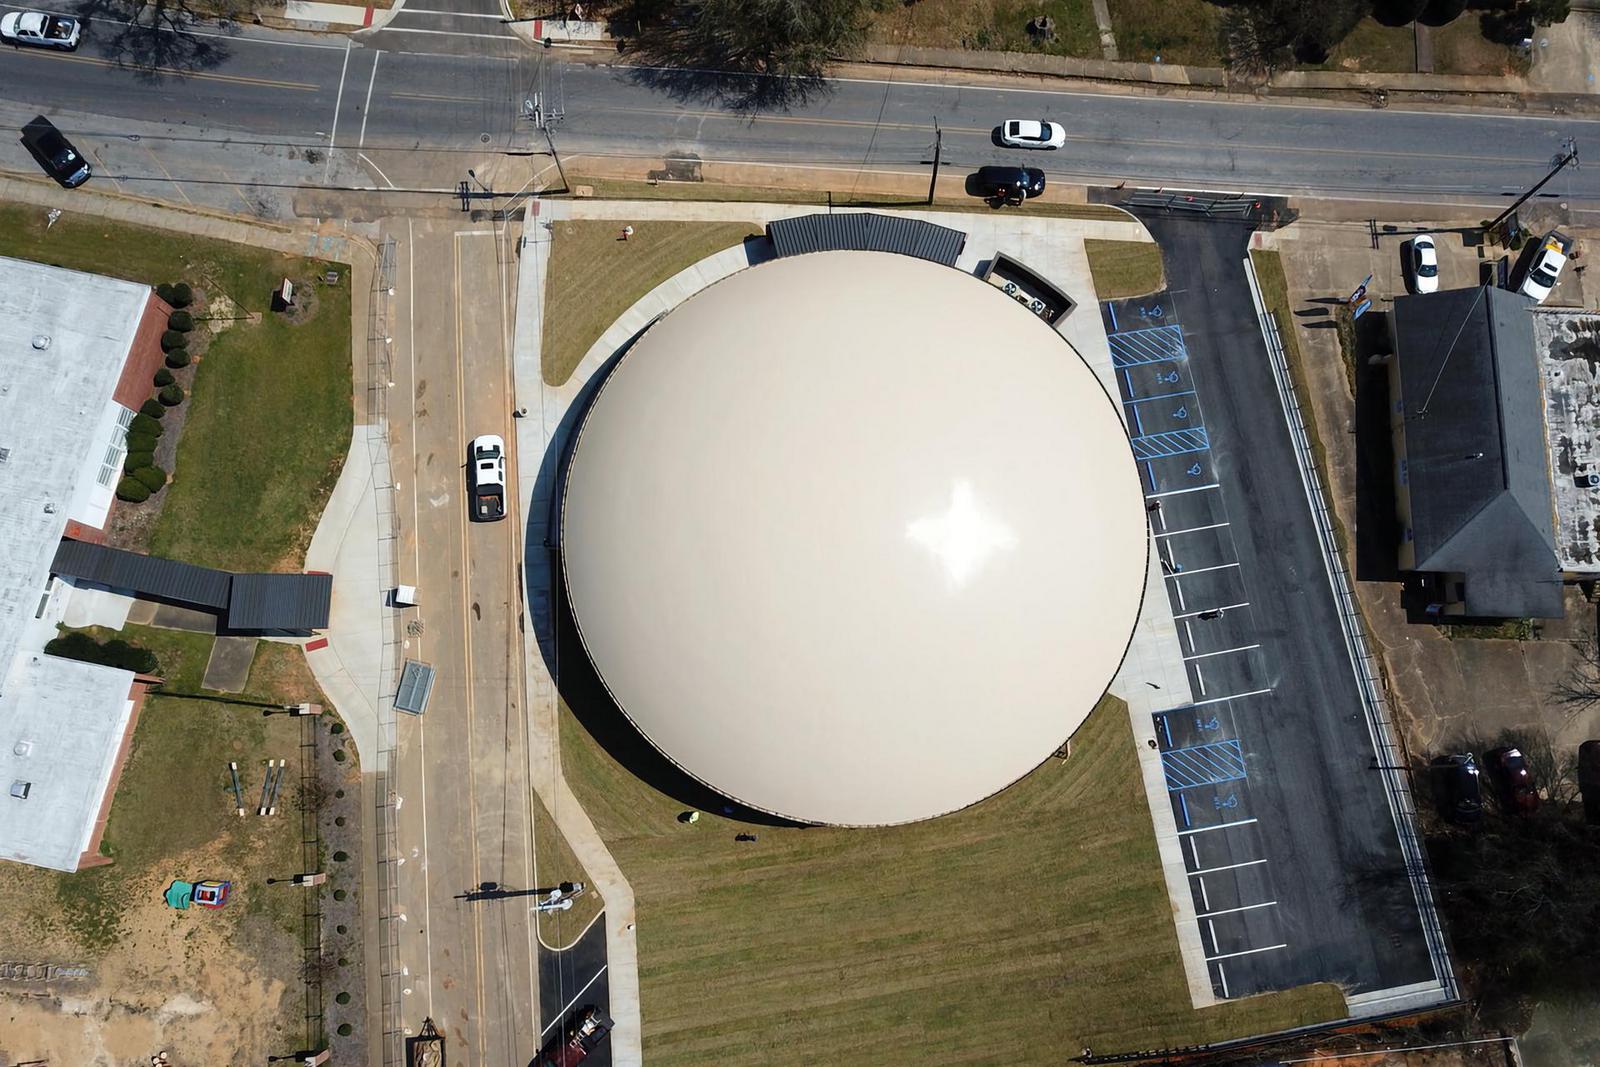 Overhead view of the dome